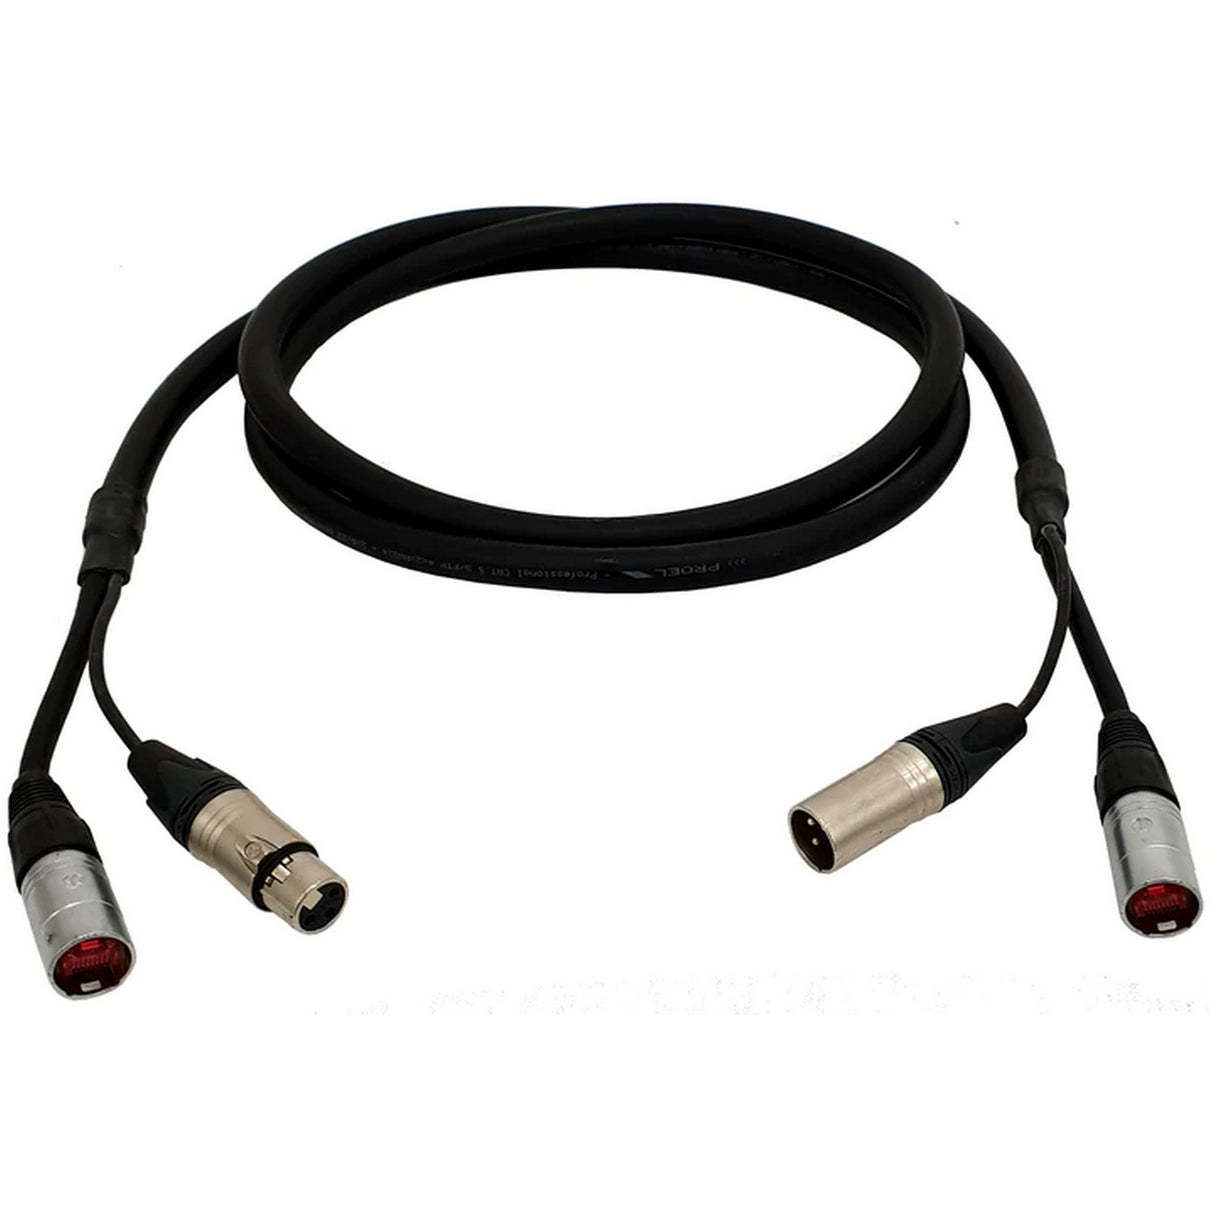 Axiom AR100LU025 Audio and Remote Cable for Linking Adjacent Floor Subwoofers, 8-Feet